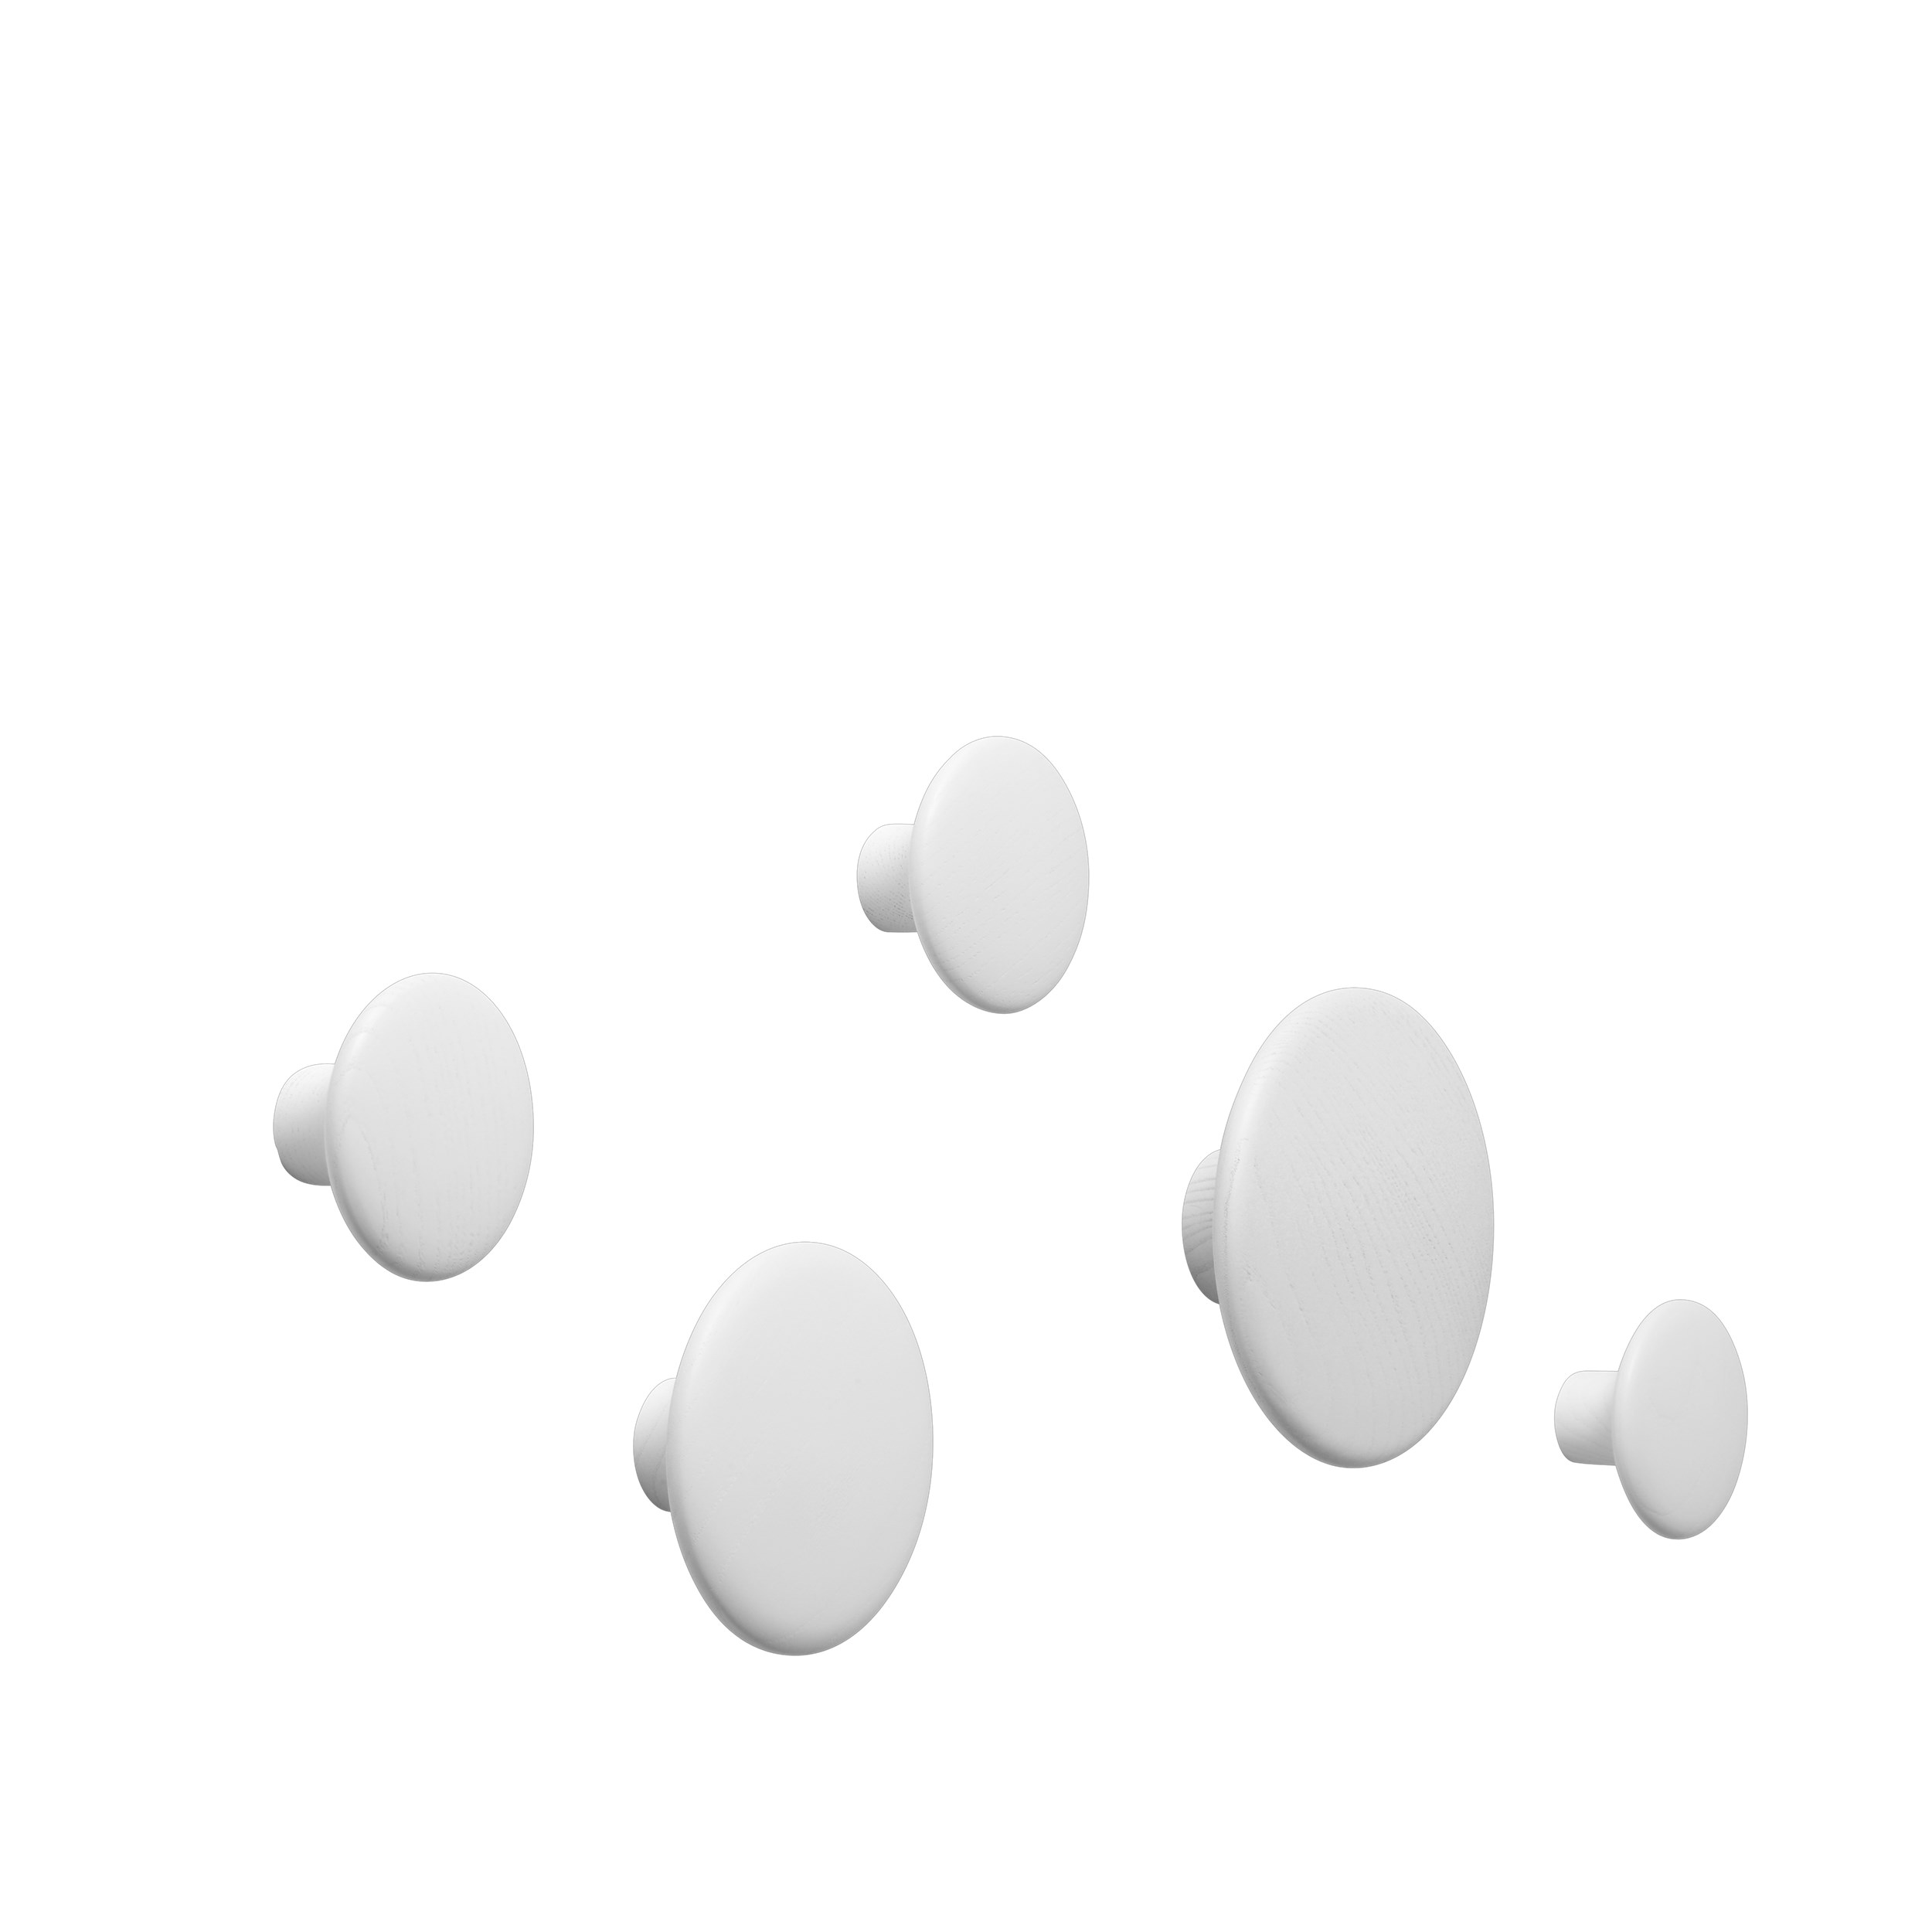 The dots set of 5 white